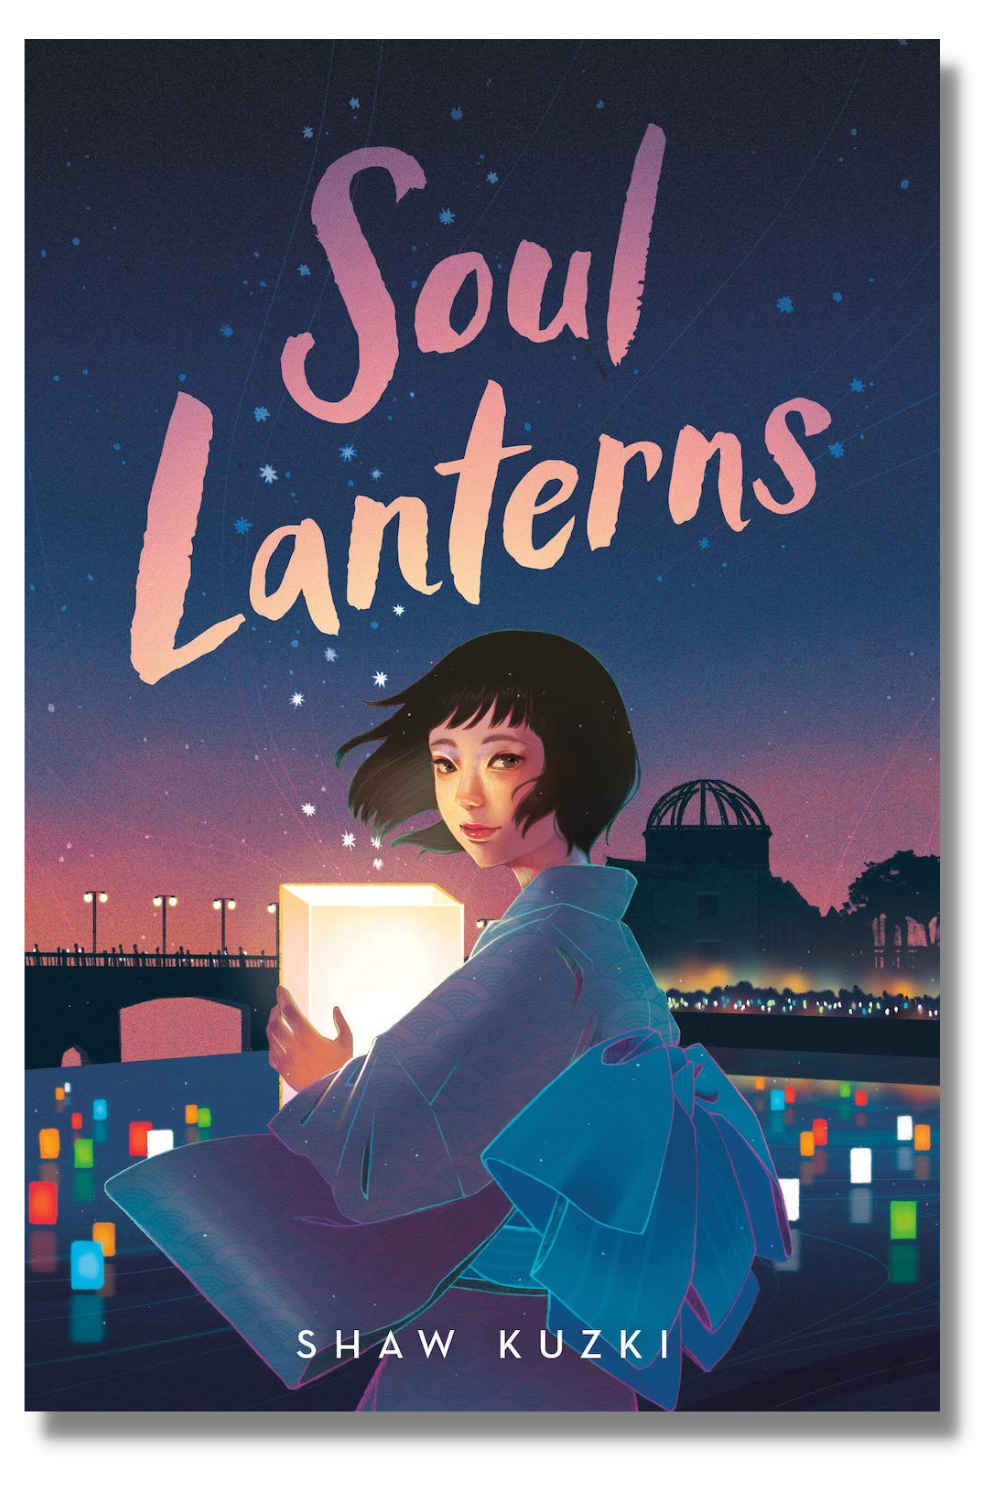 The cover of "Soul Lanterns"